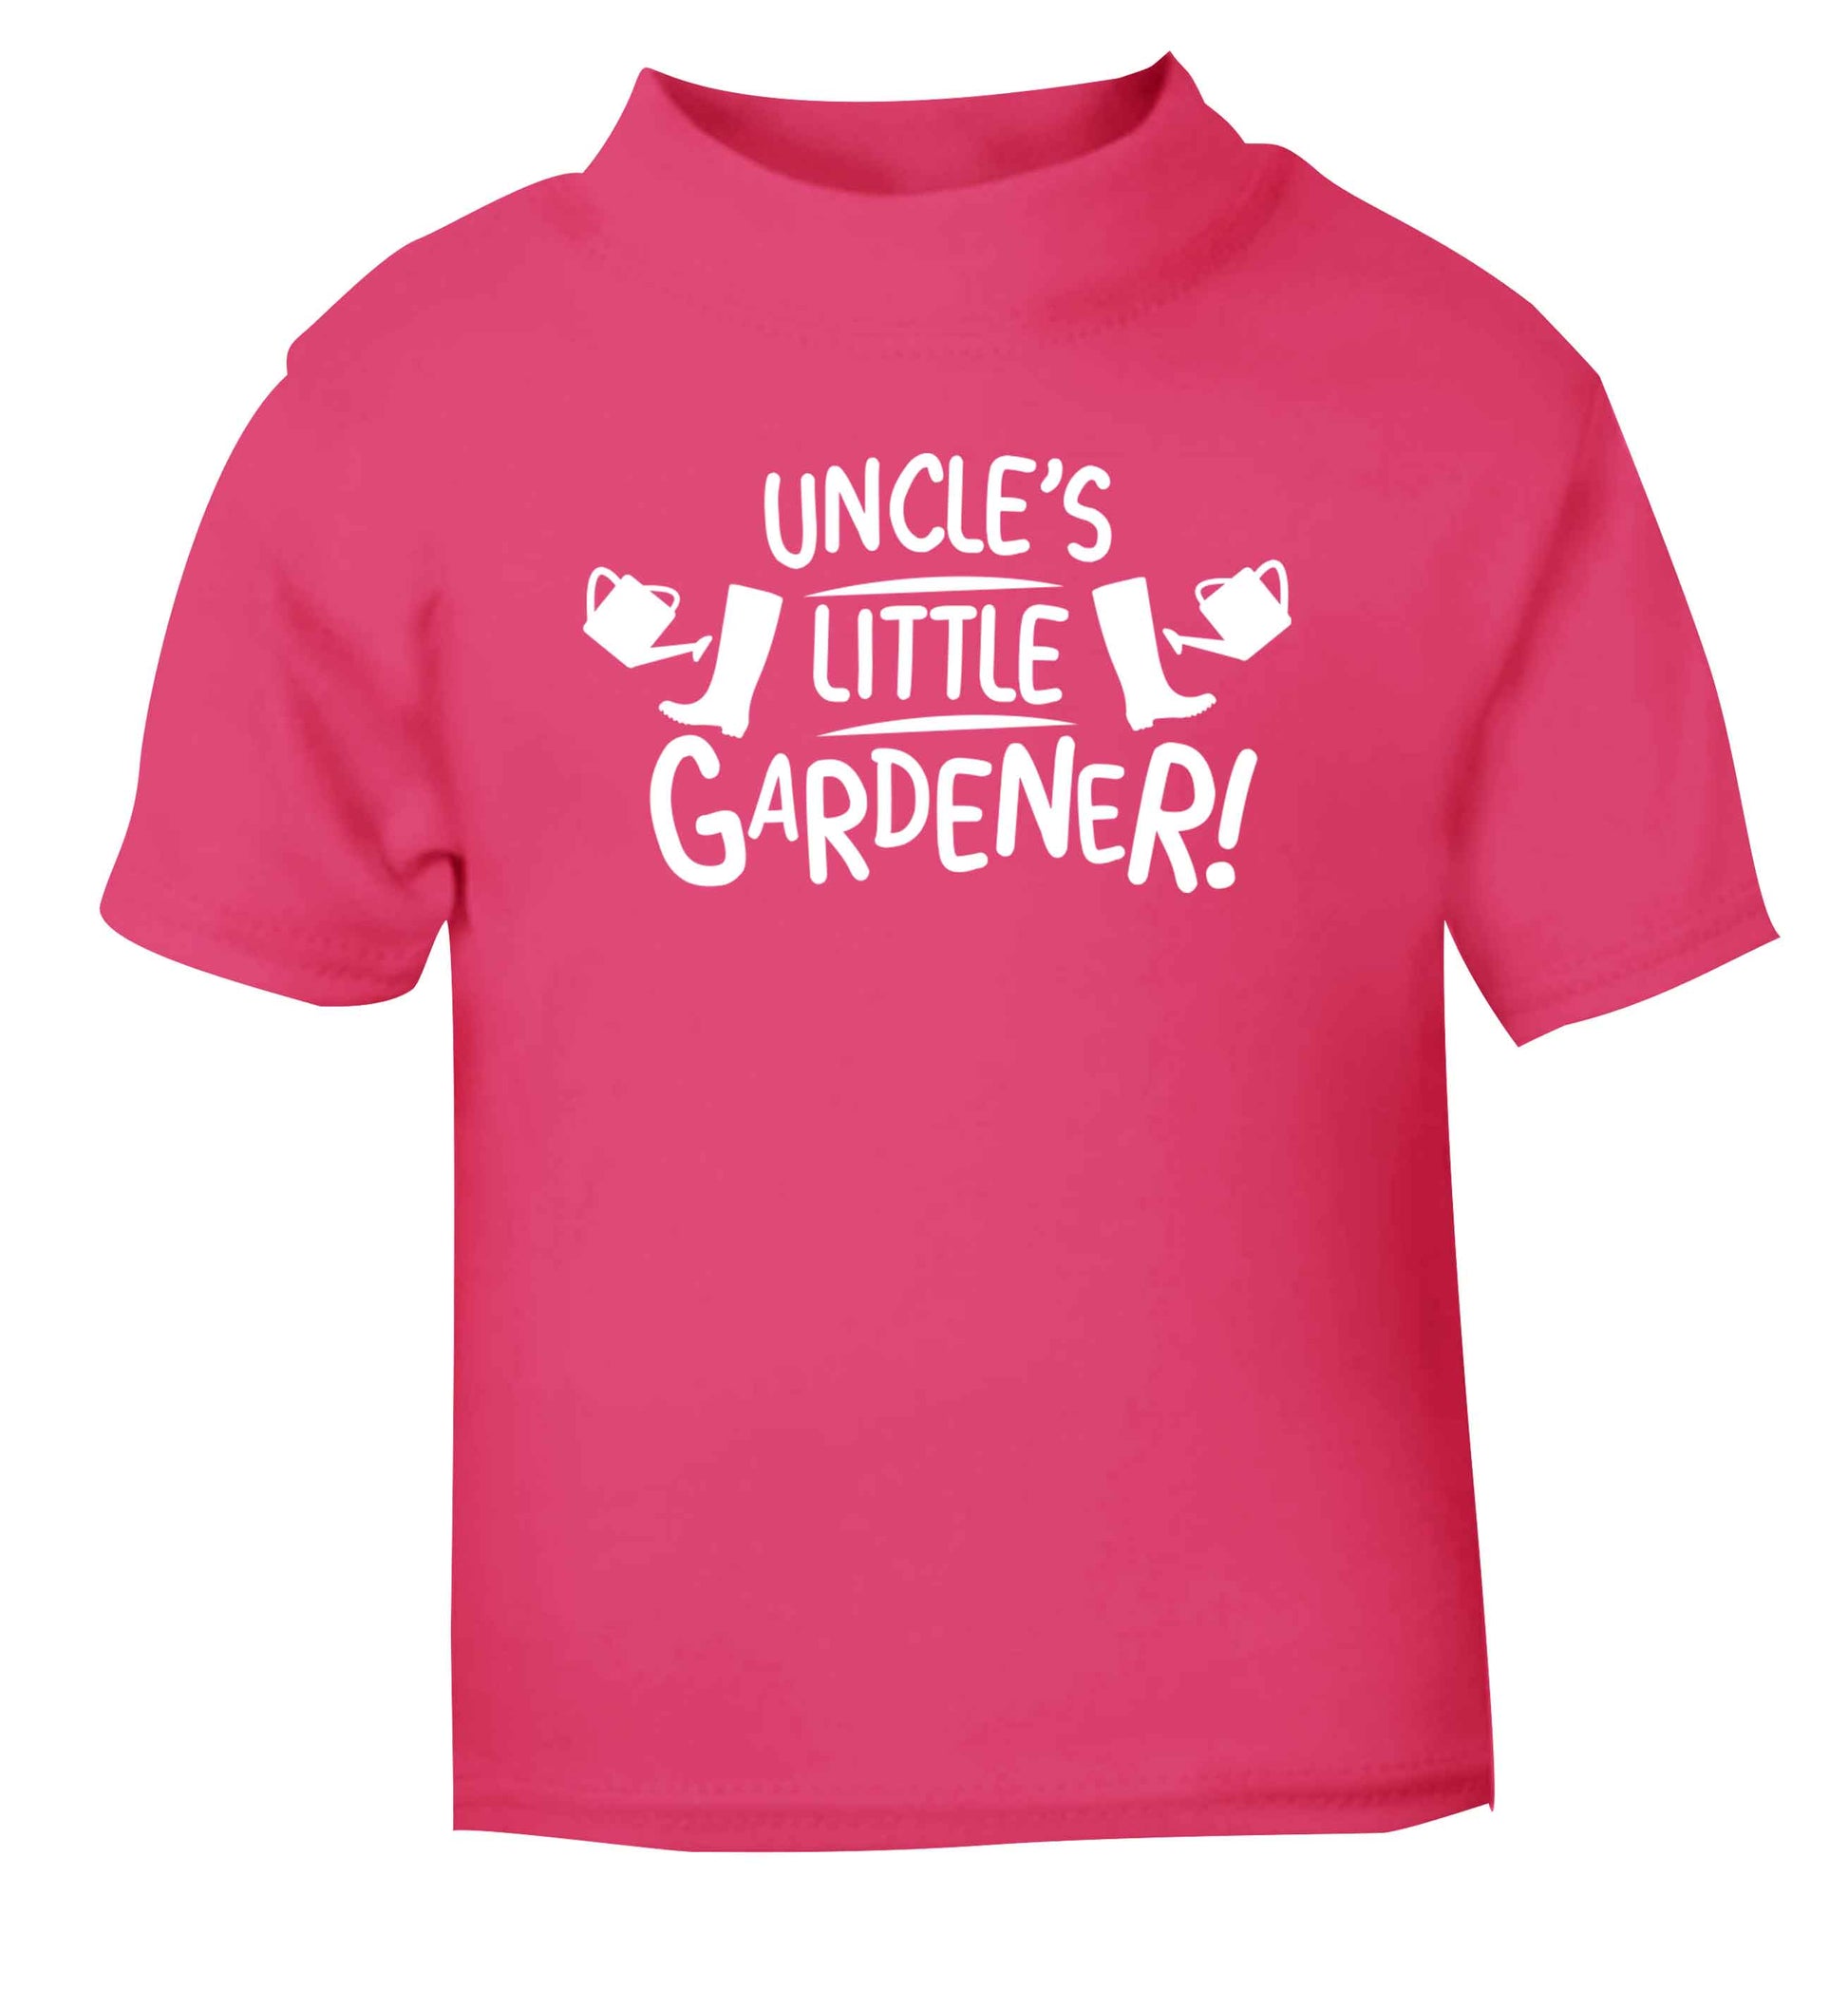 Uncle's little gardener pink Baby Toddler Tshirt 2 Years